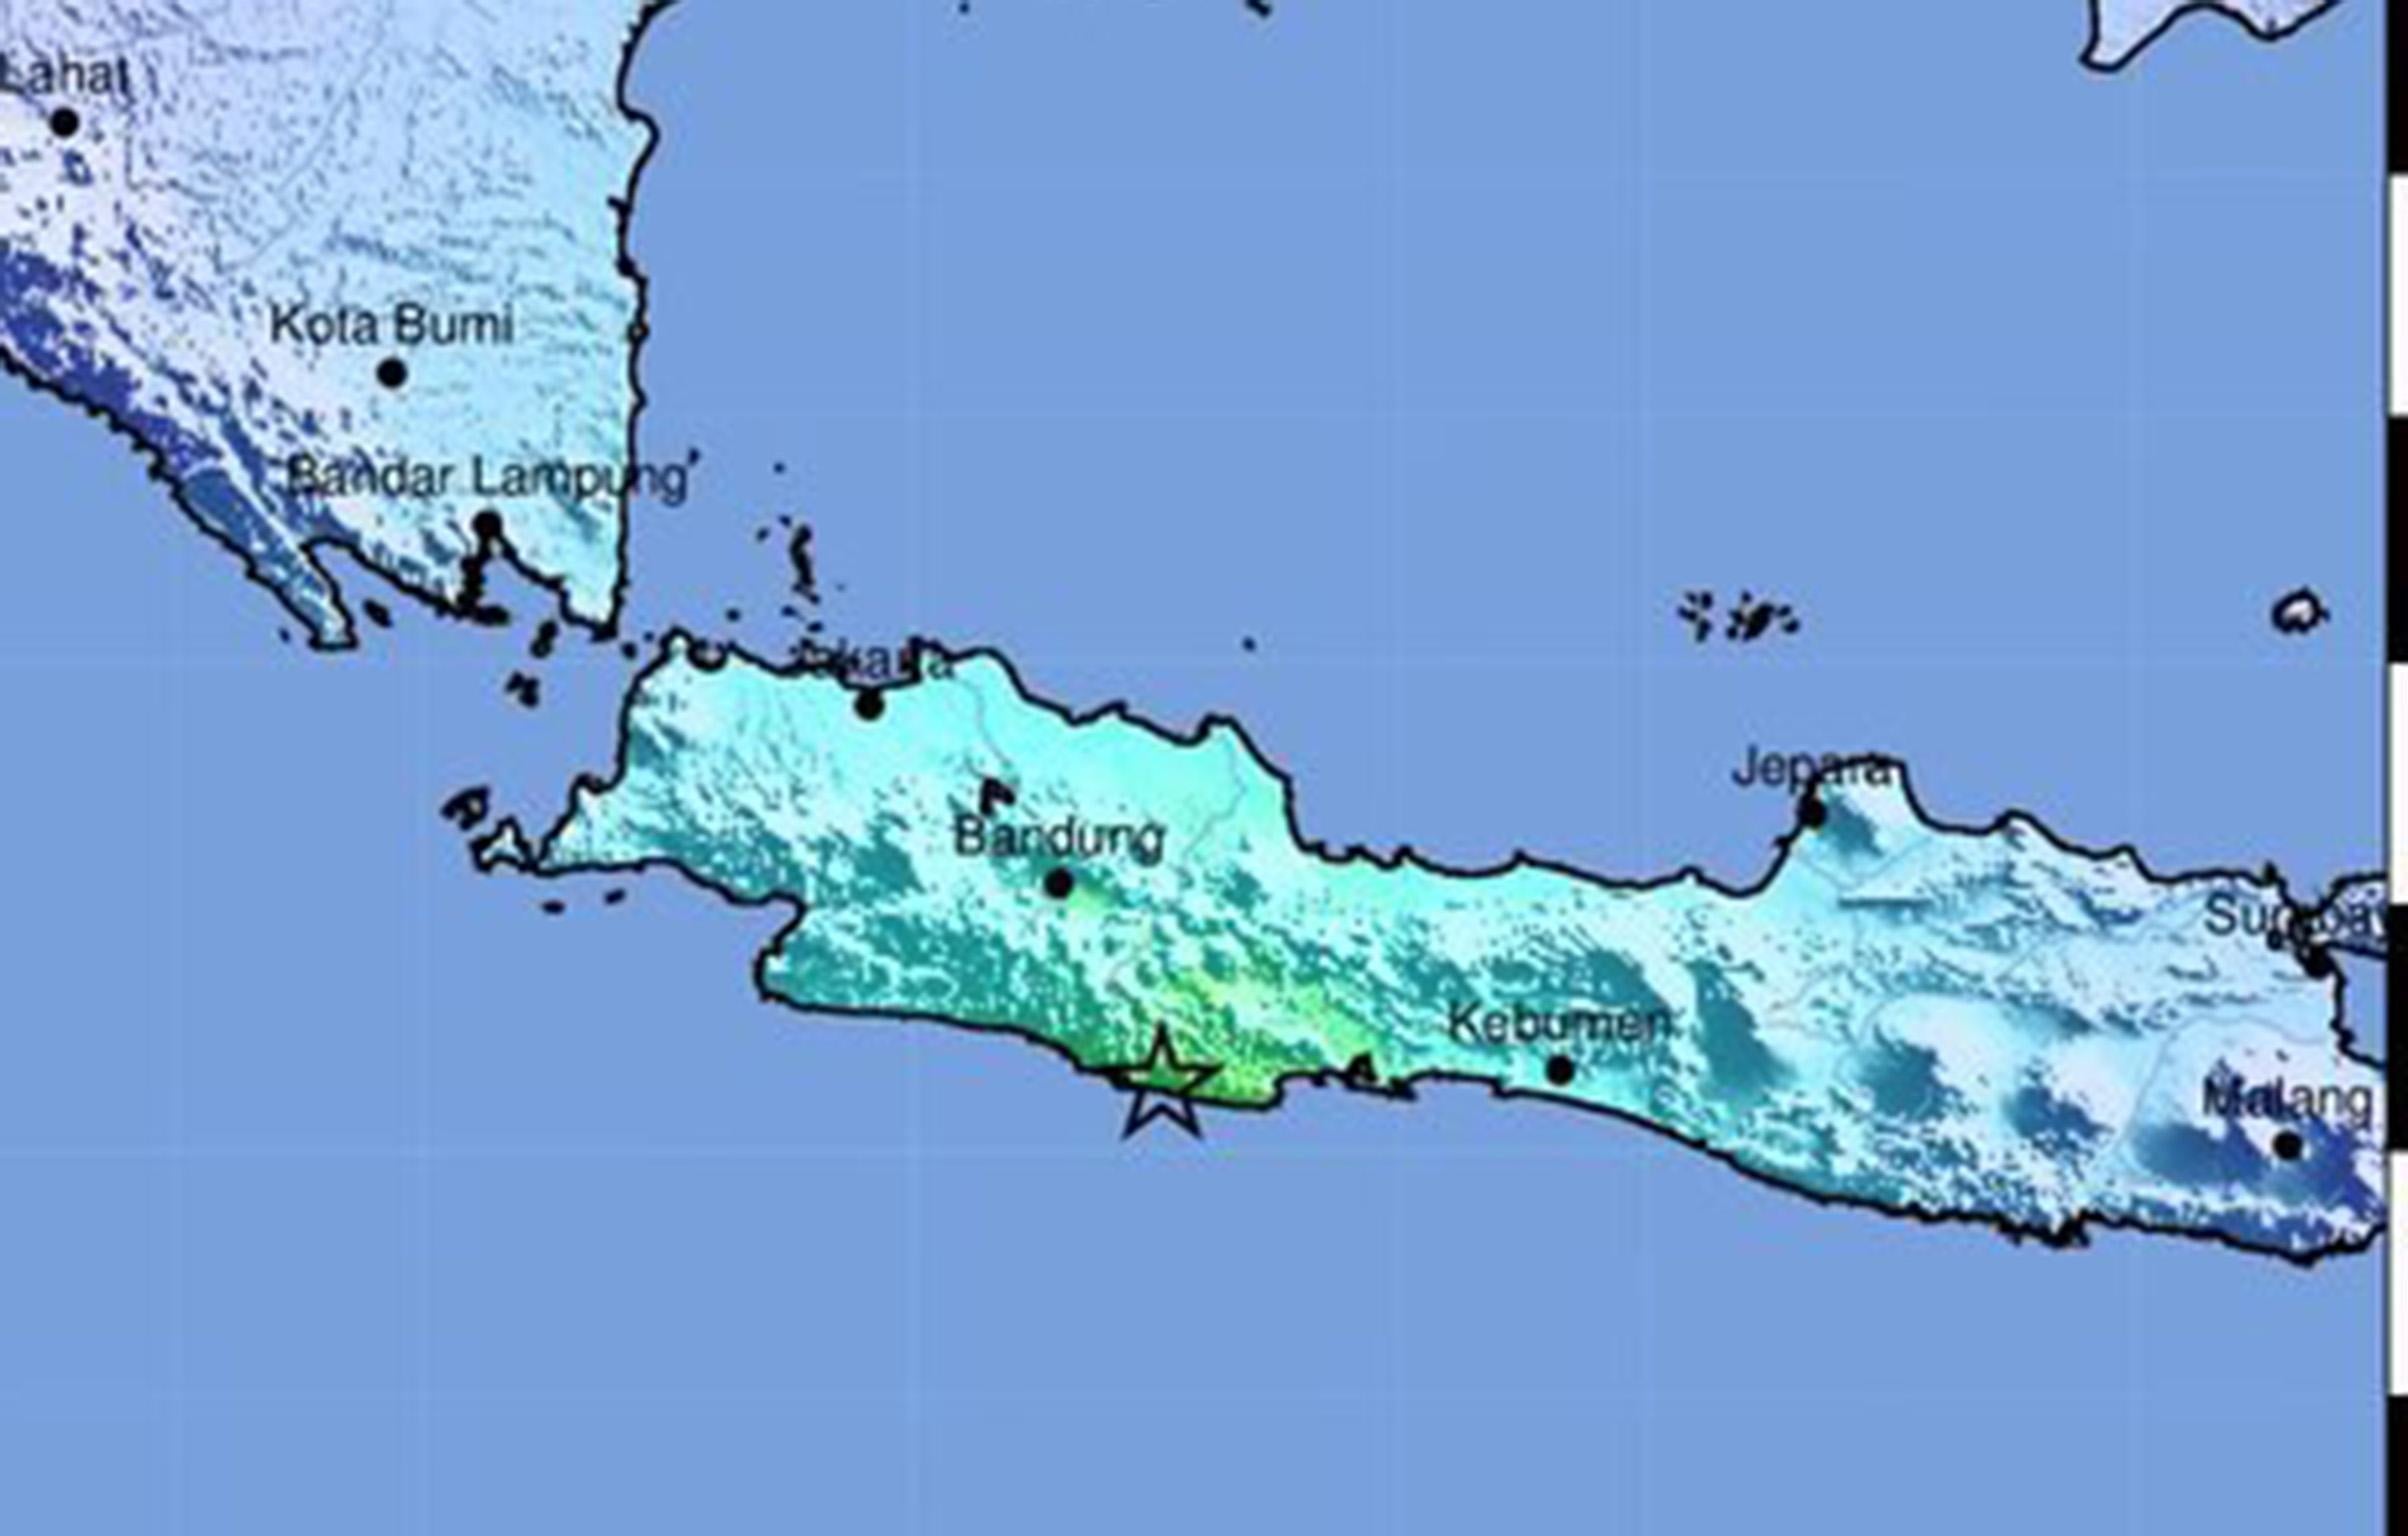 Indonesia has been struck by an earthquake